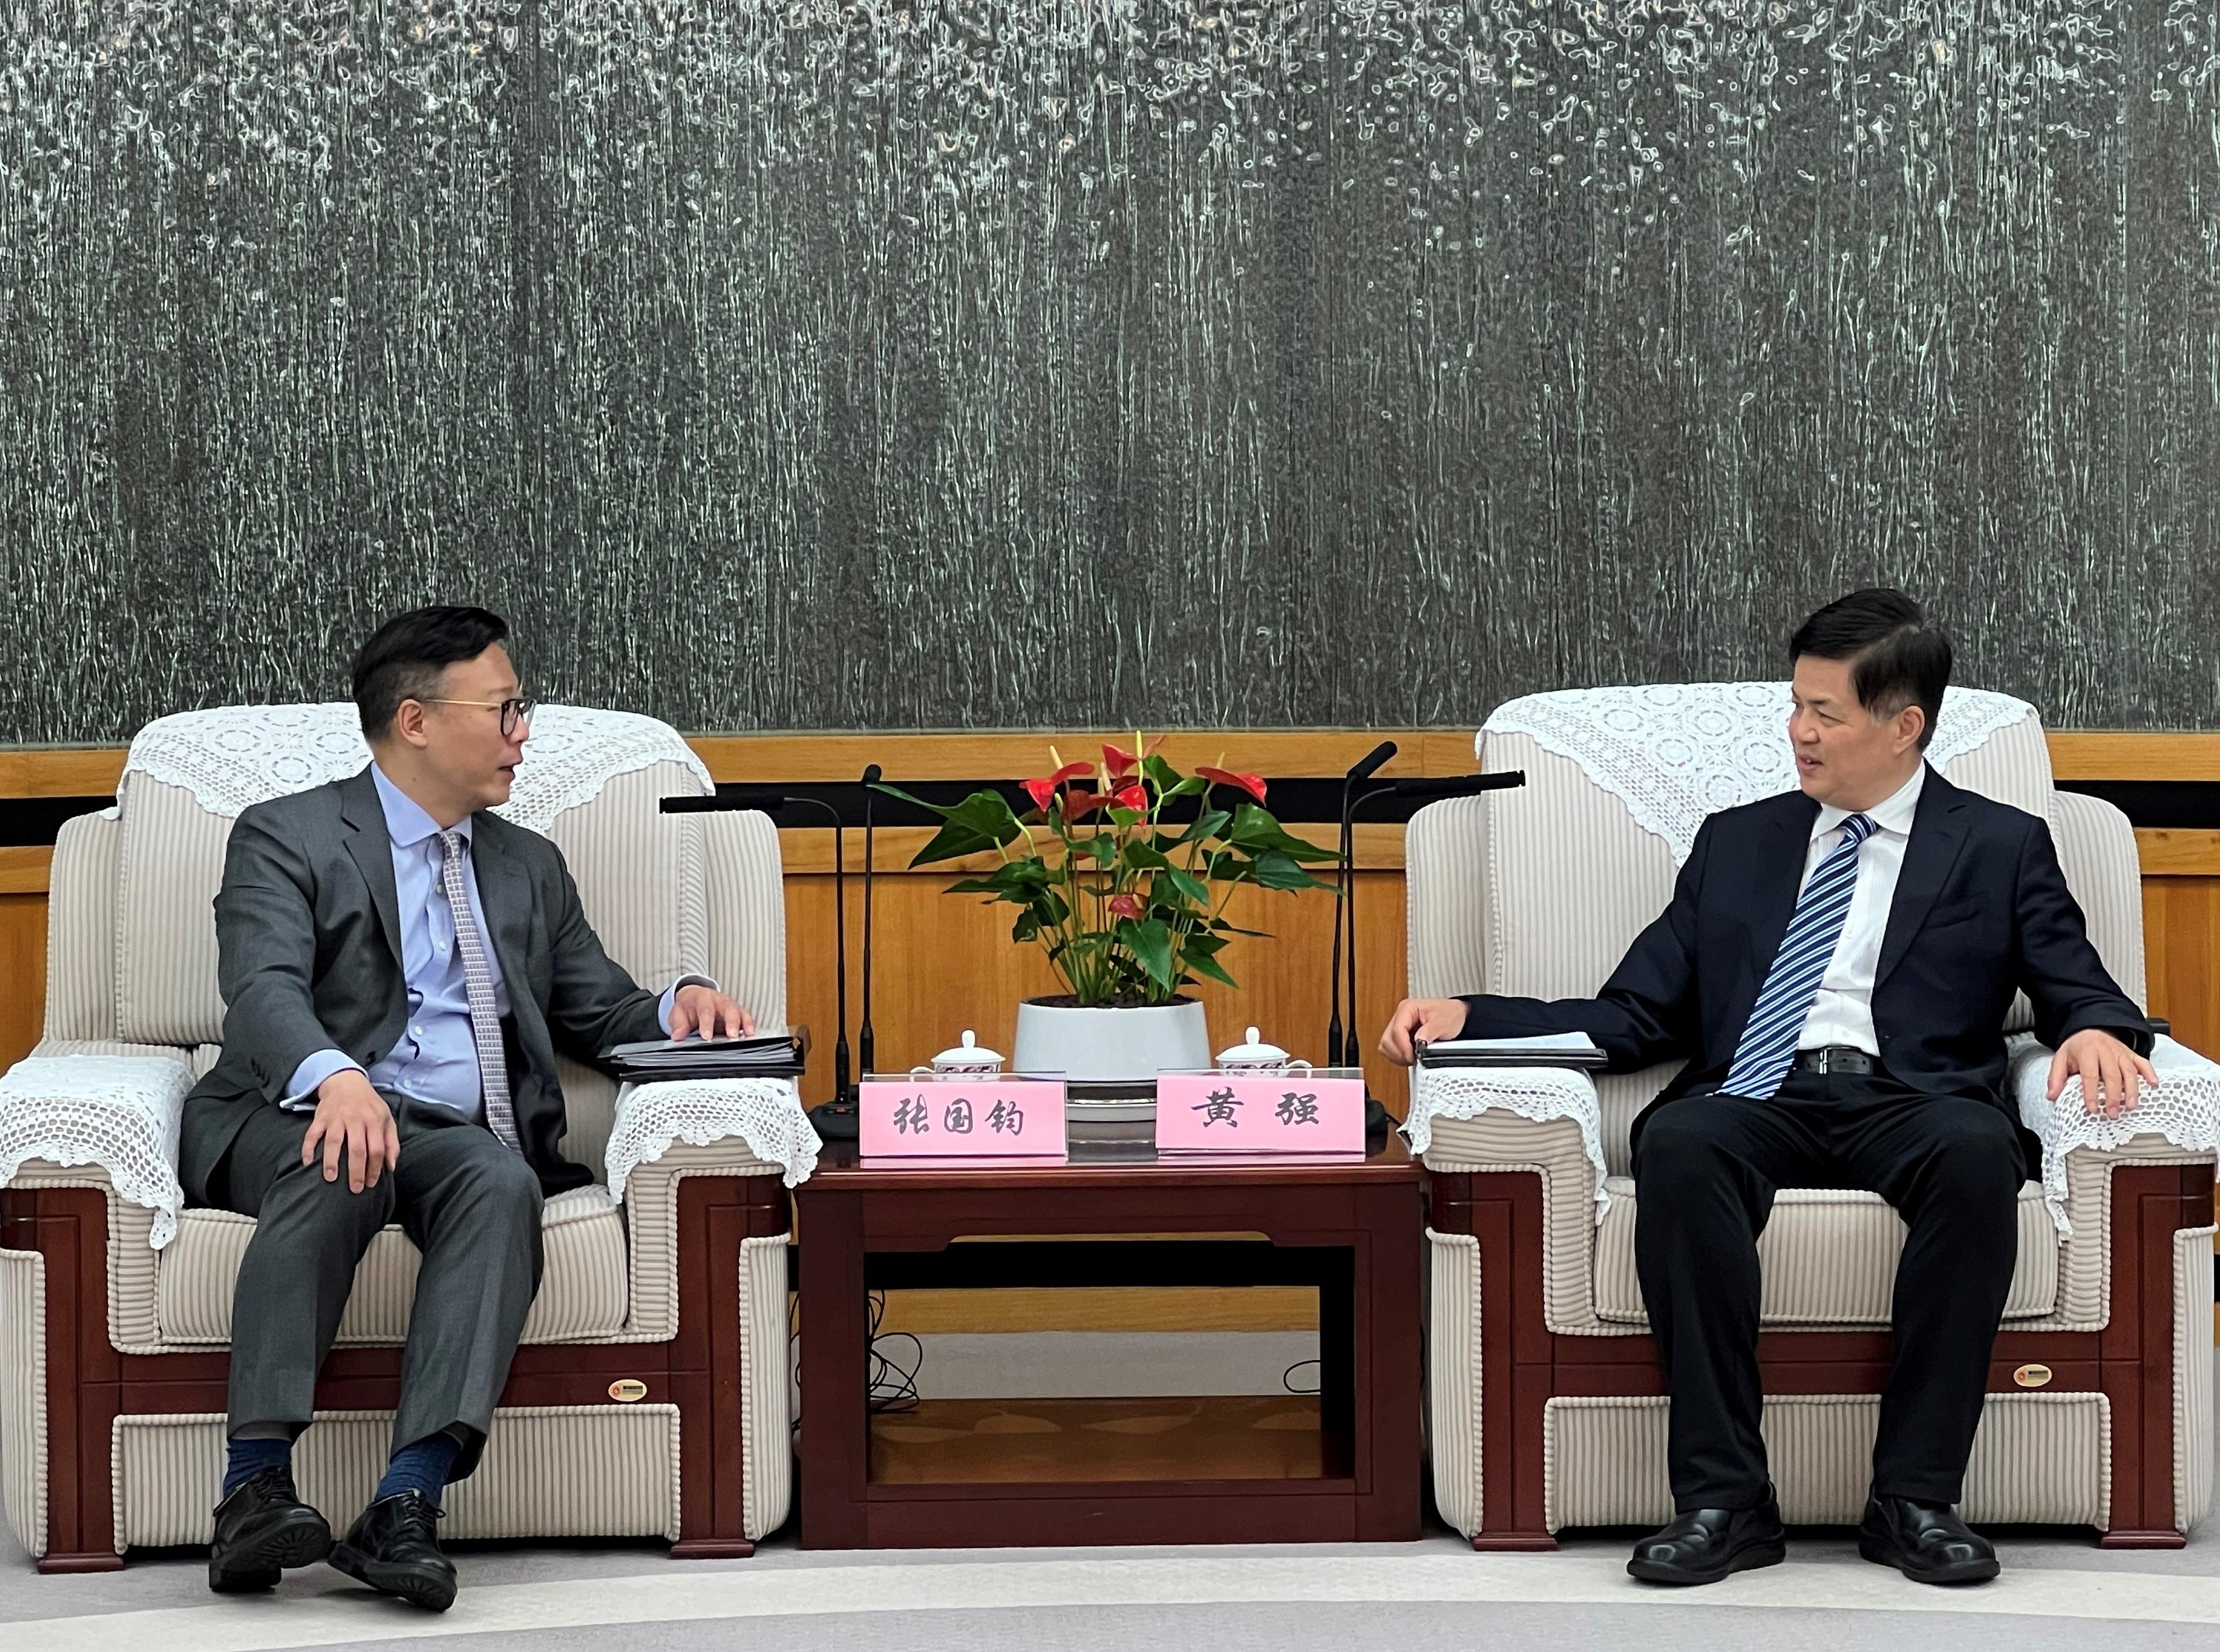 The Deputy Secretary for Justice, Mr Cheung Kwok-kwan (left), meets with Deputy Secretary-General of the Shenzhen Municipal People's Government Mr Huang Qiang (right), in Shenzhen today (April 19).